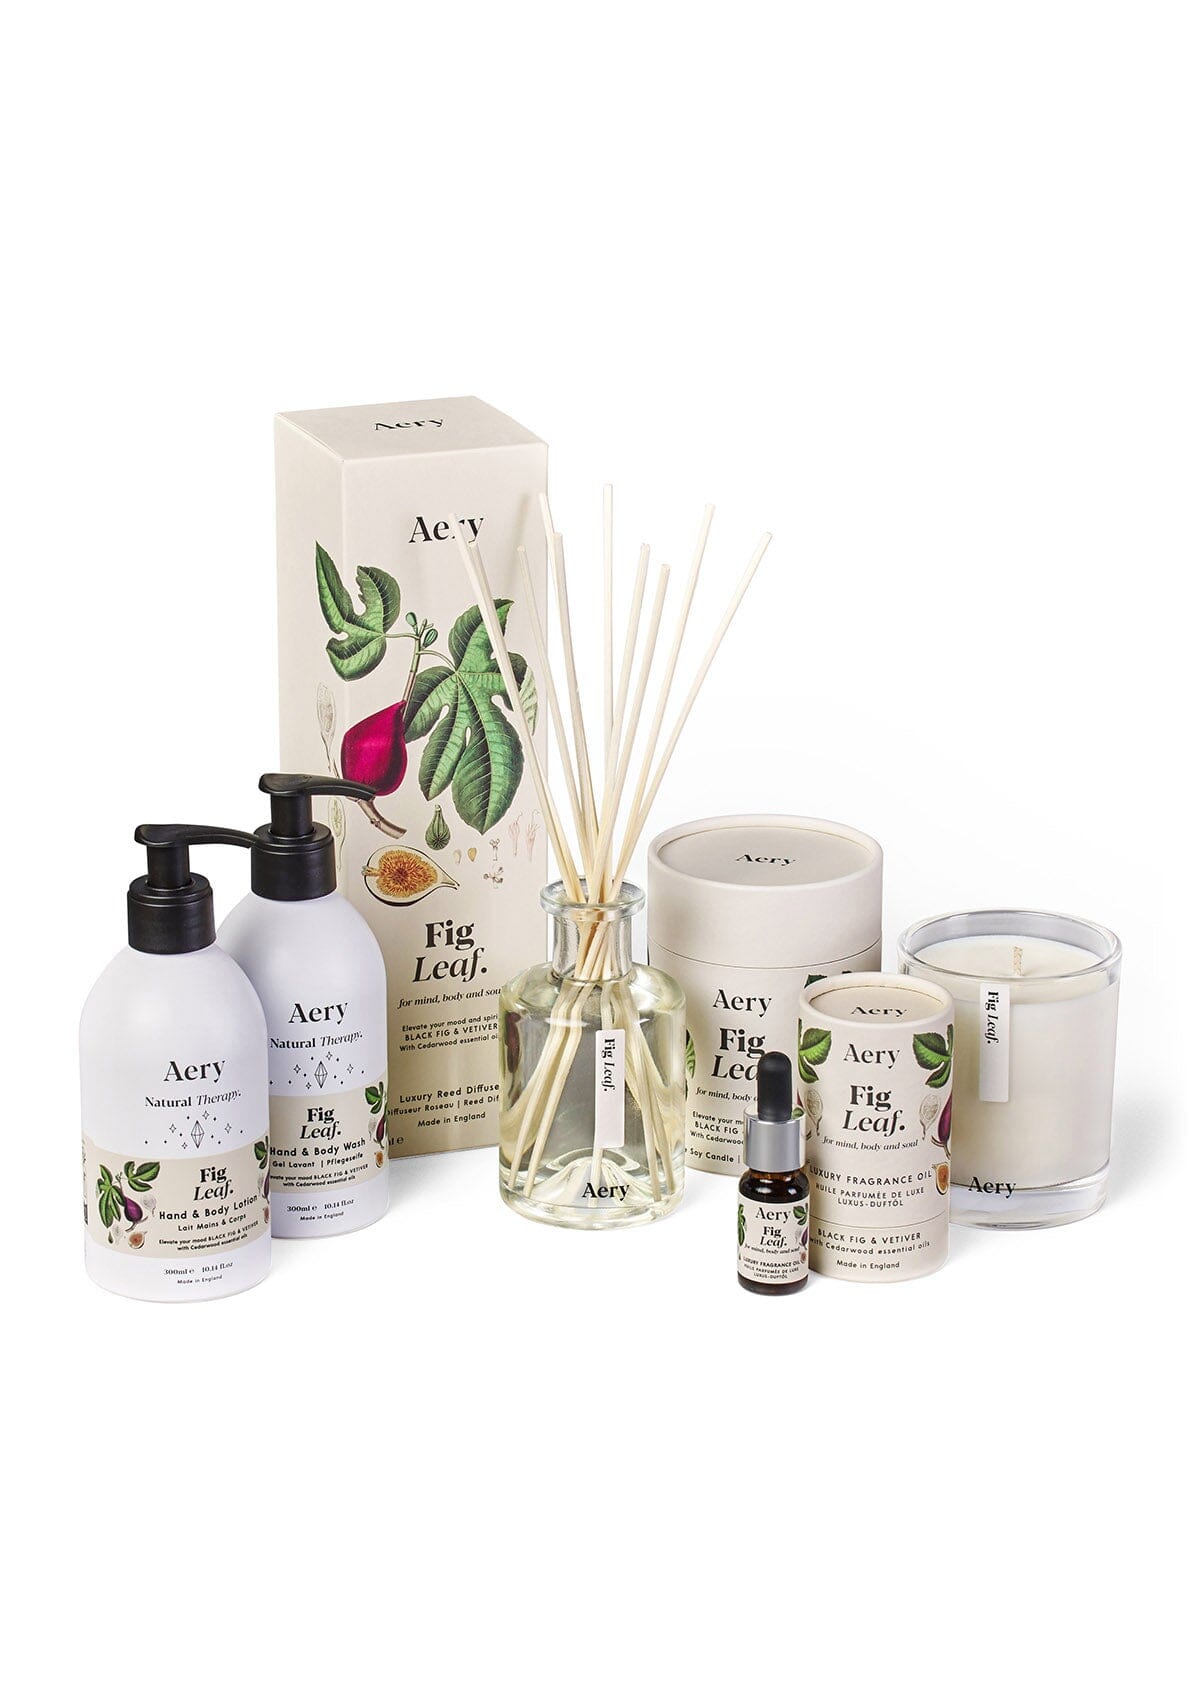 Cream Fig Leaf candle, diffuser, fragrance oil, hand and body wash and hand and body lotion by Aery displayed on white background 